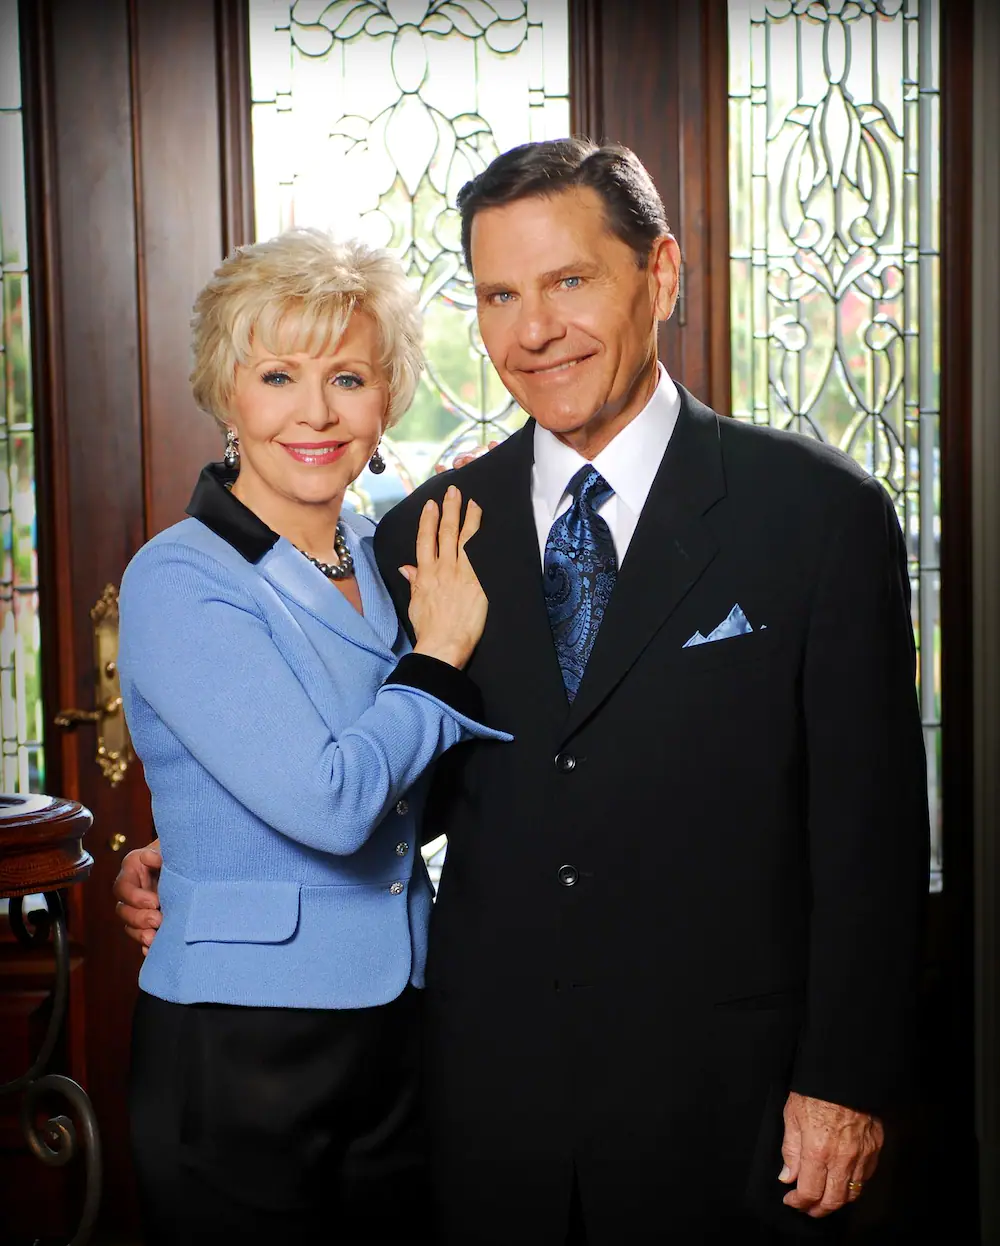 Kenneth Copeland: Exploring the Life, Ministry, and Controversies of a Prominent Televangelist